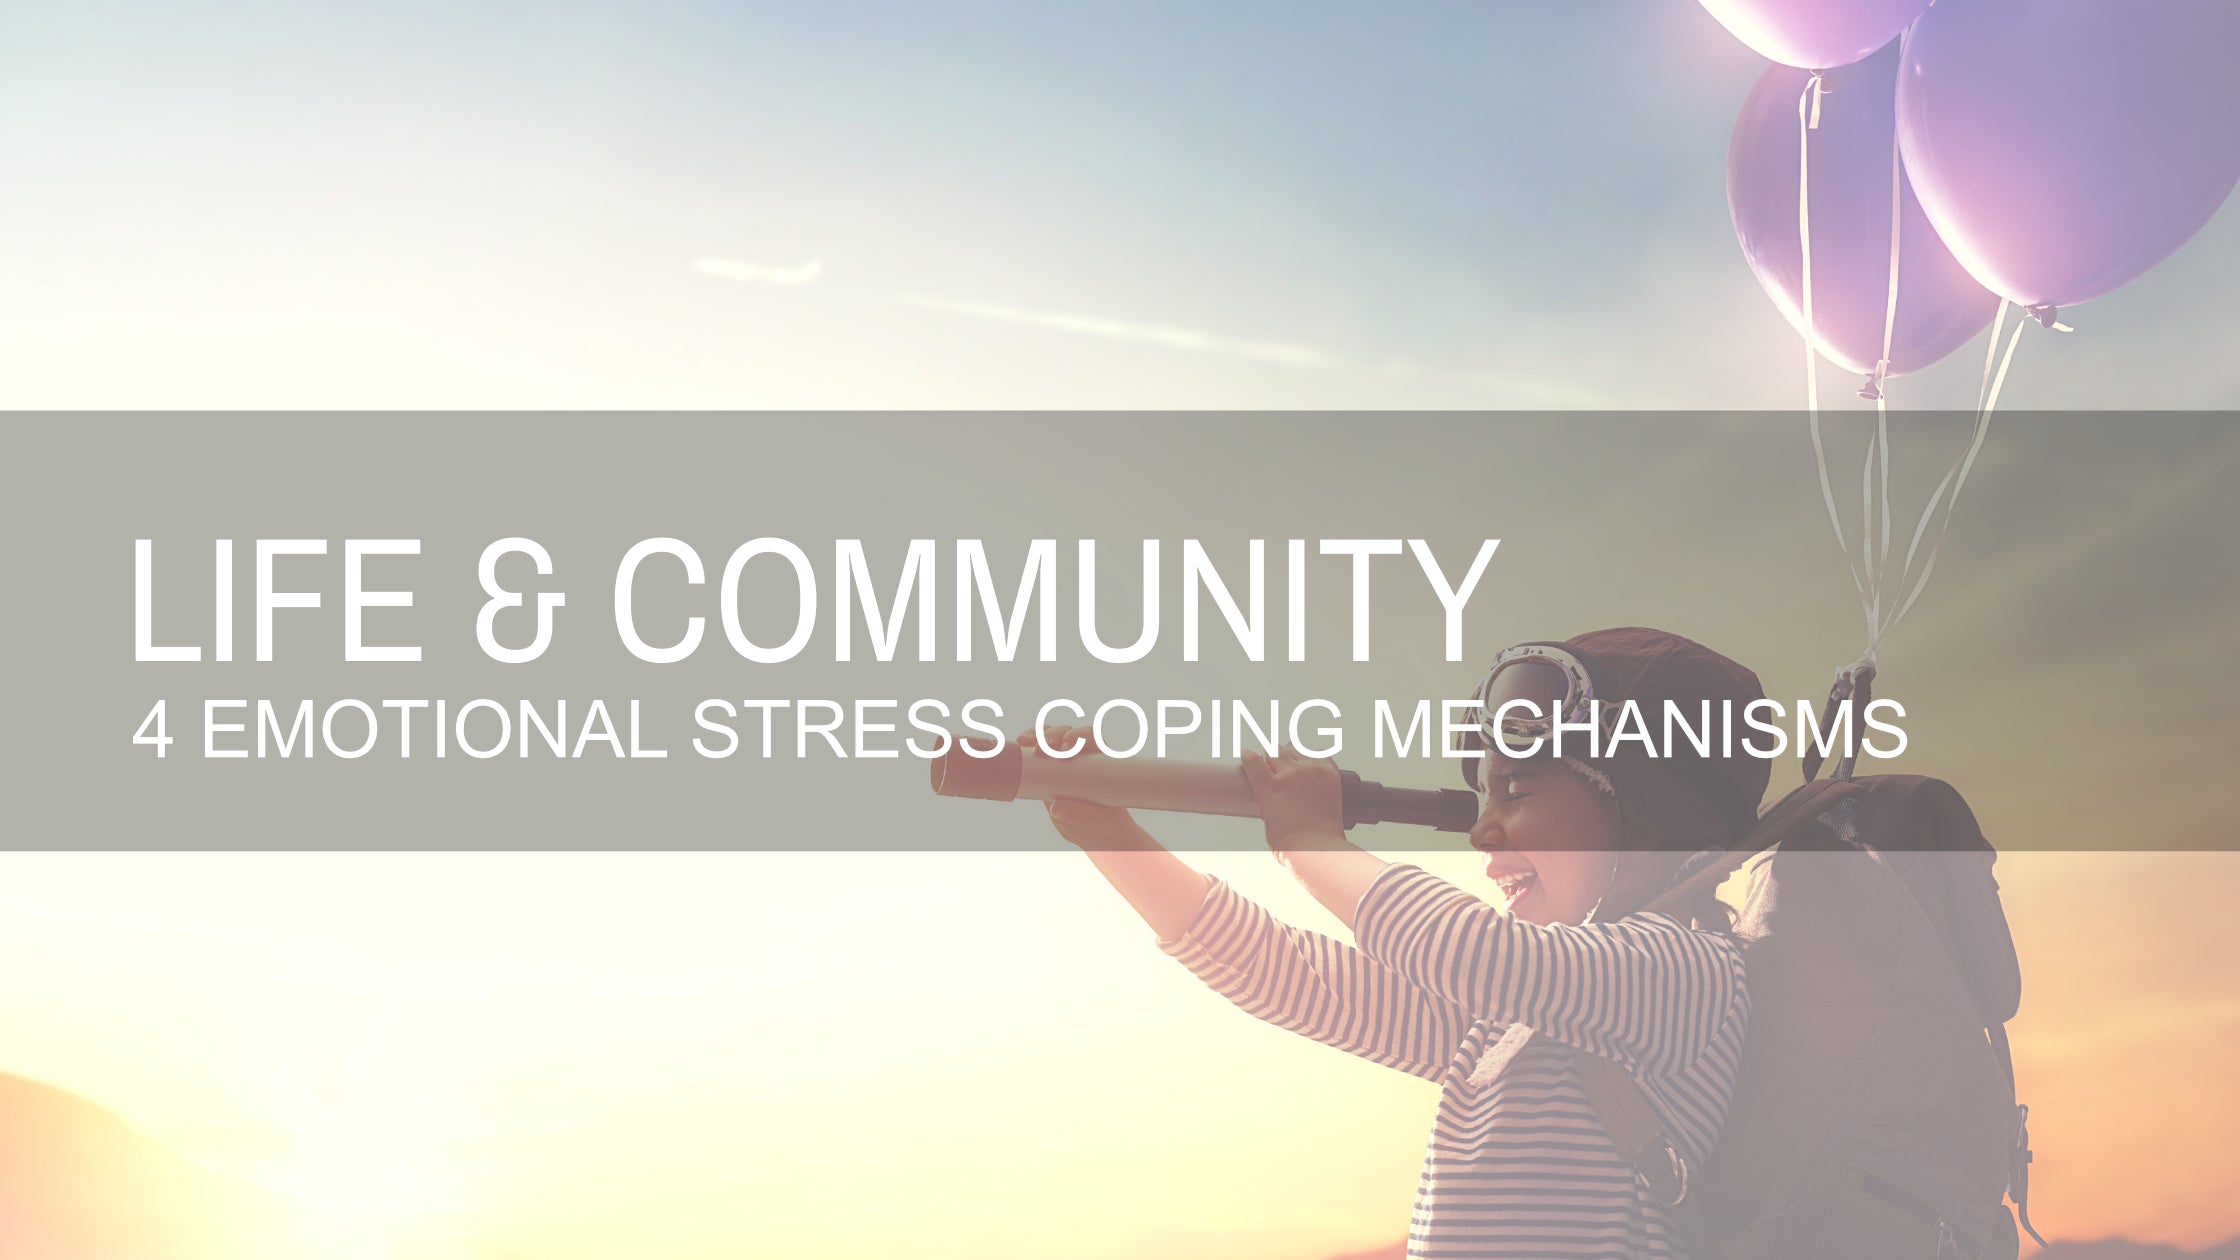 4 Common Emotional Stress Coping Mechanisms